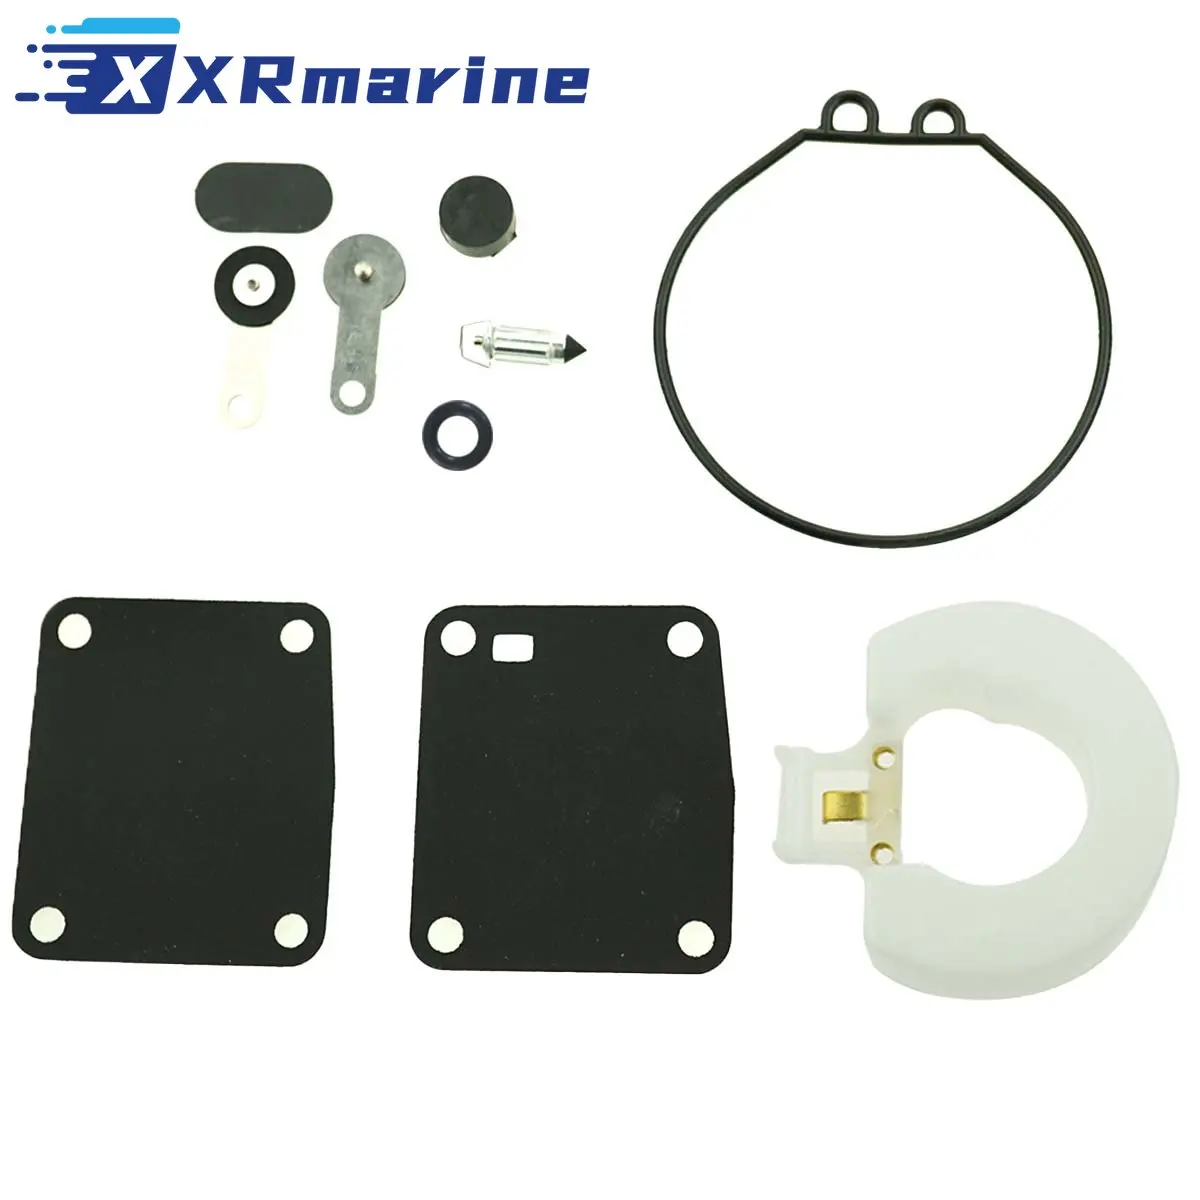 6G1-W0093-00 Carburetor Repair Kit For Yamaha 3HP 6HP 8HP Outboard Engine 1984-1996 6G1-W0093-00-00 6L5-W0093-00-00 1984 дни в бирме романы